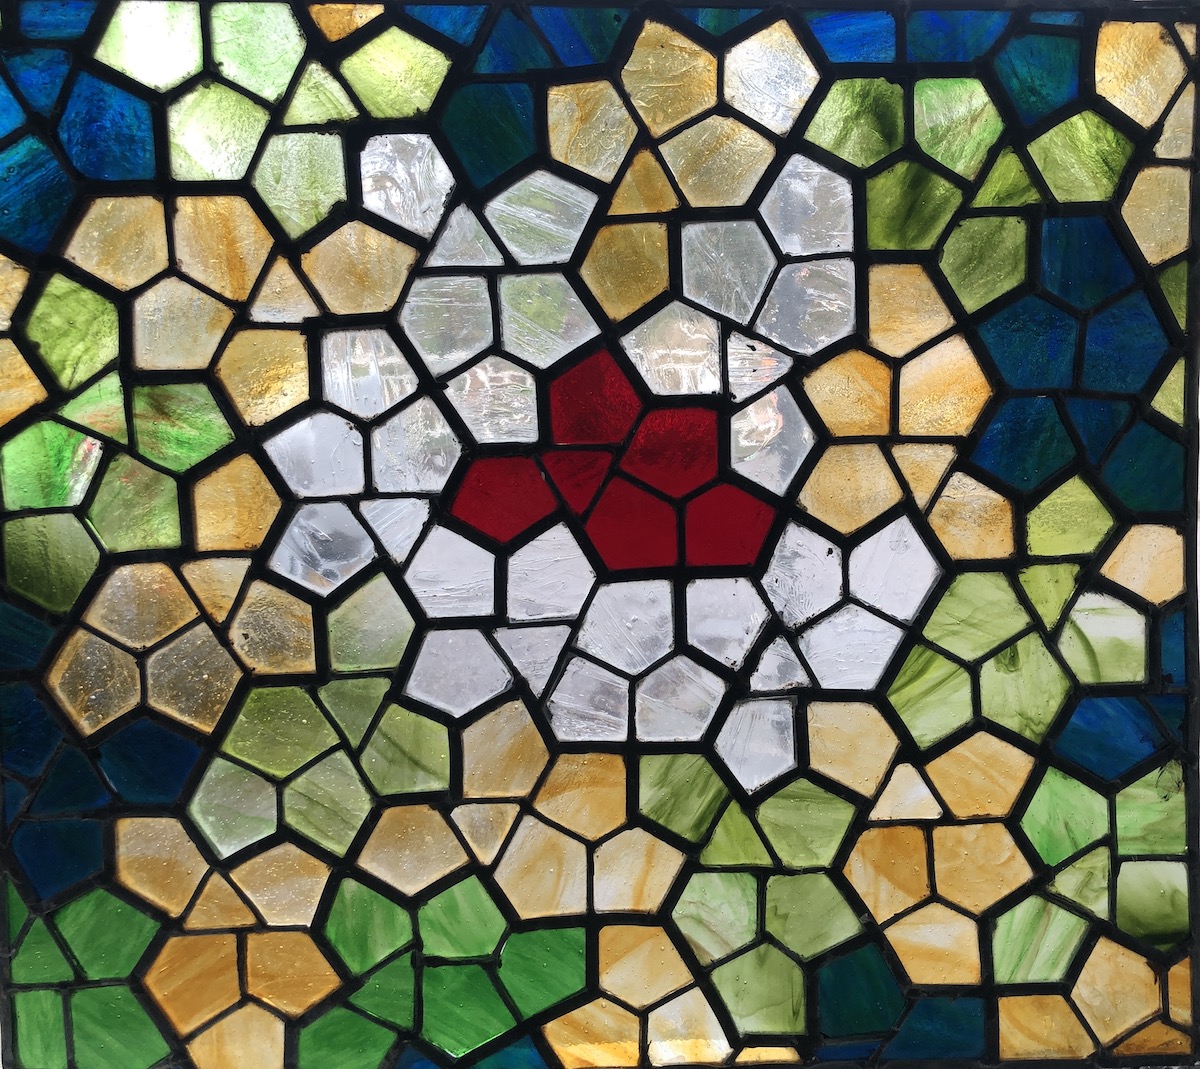 Professor David Spiegelhalter's stained glass version of a spectre tiling